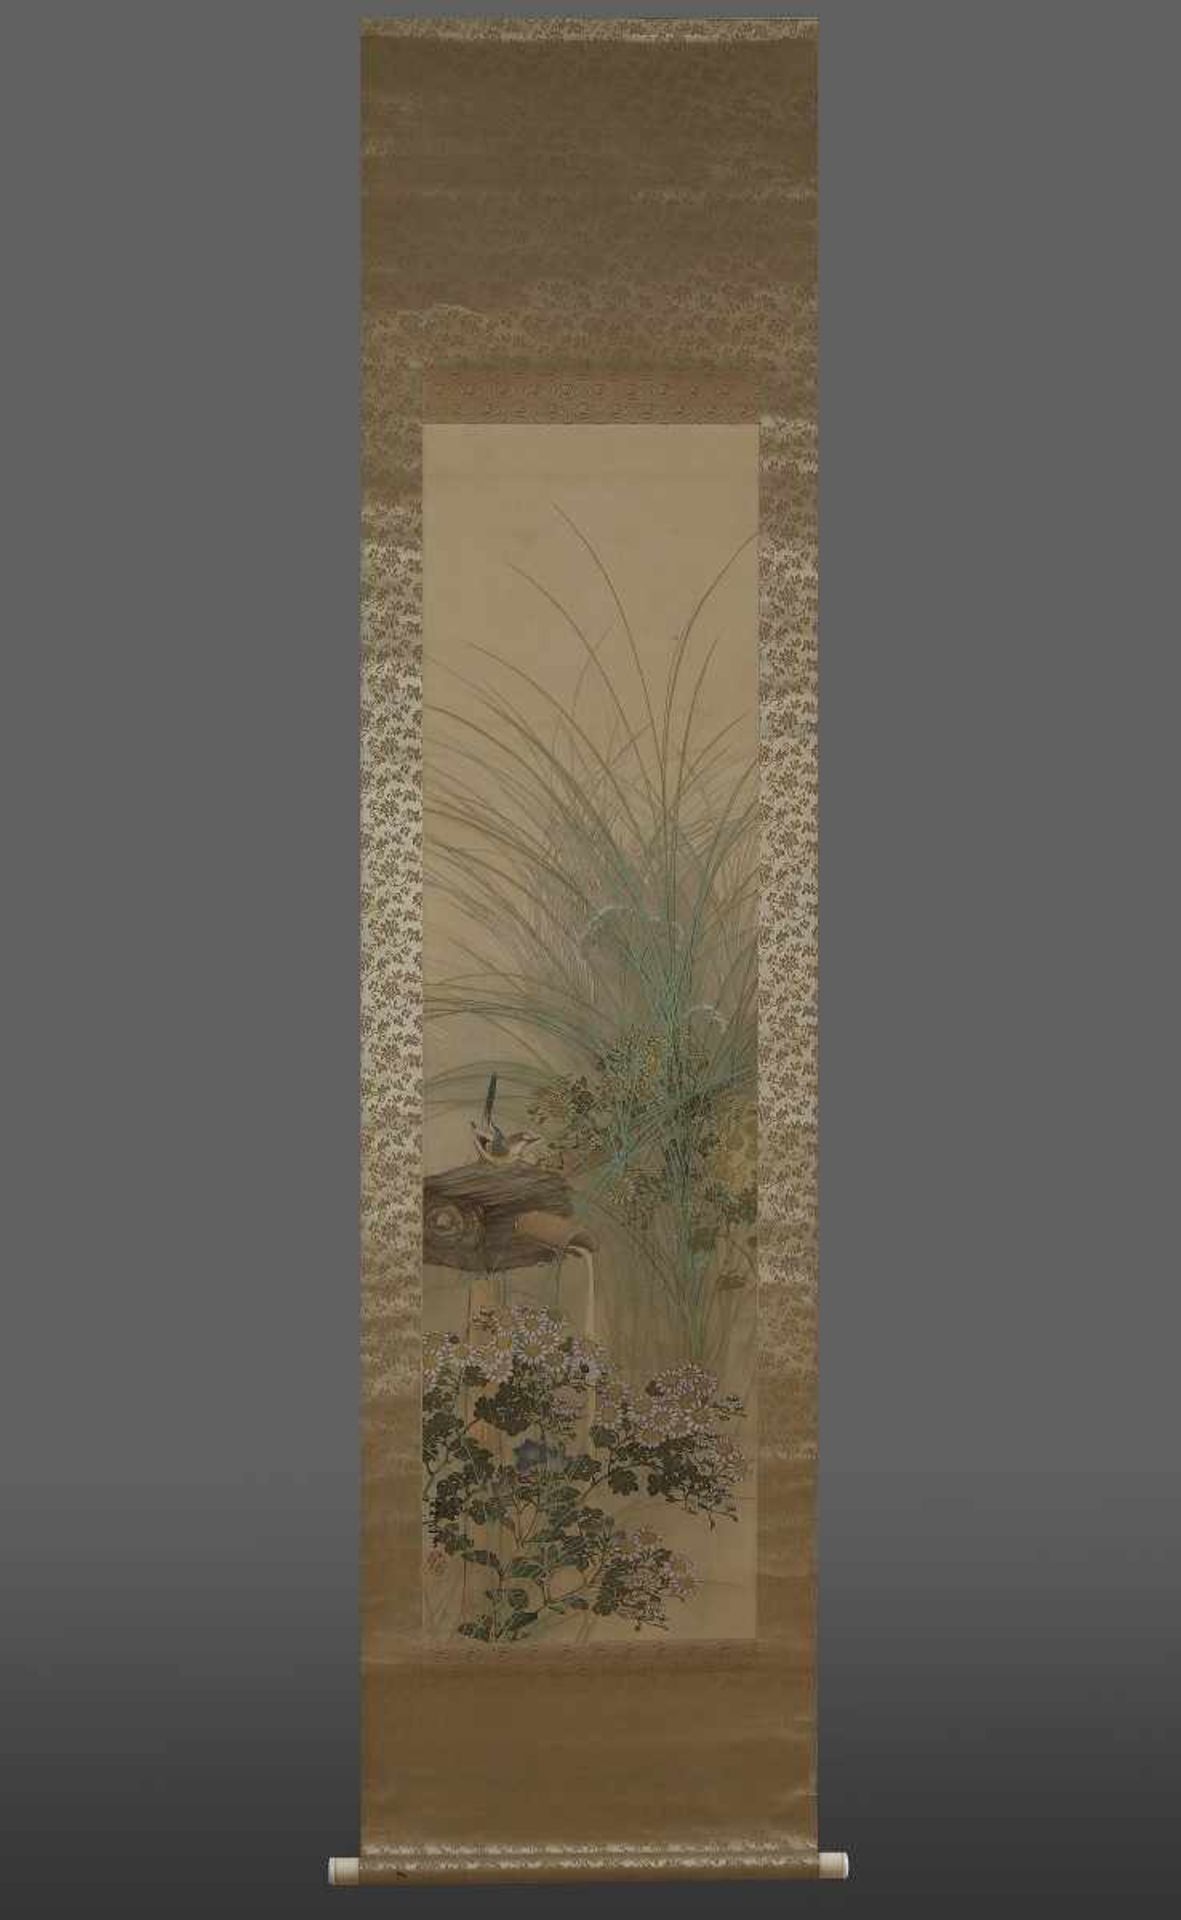 Three Japanese Scrolls Decorated with cranes, a garden scene and a coastal-scene with cranes and